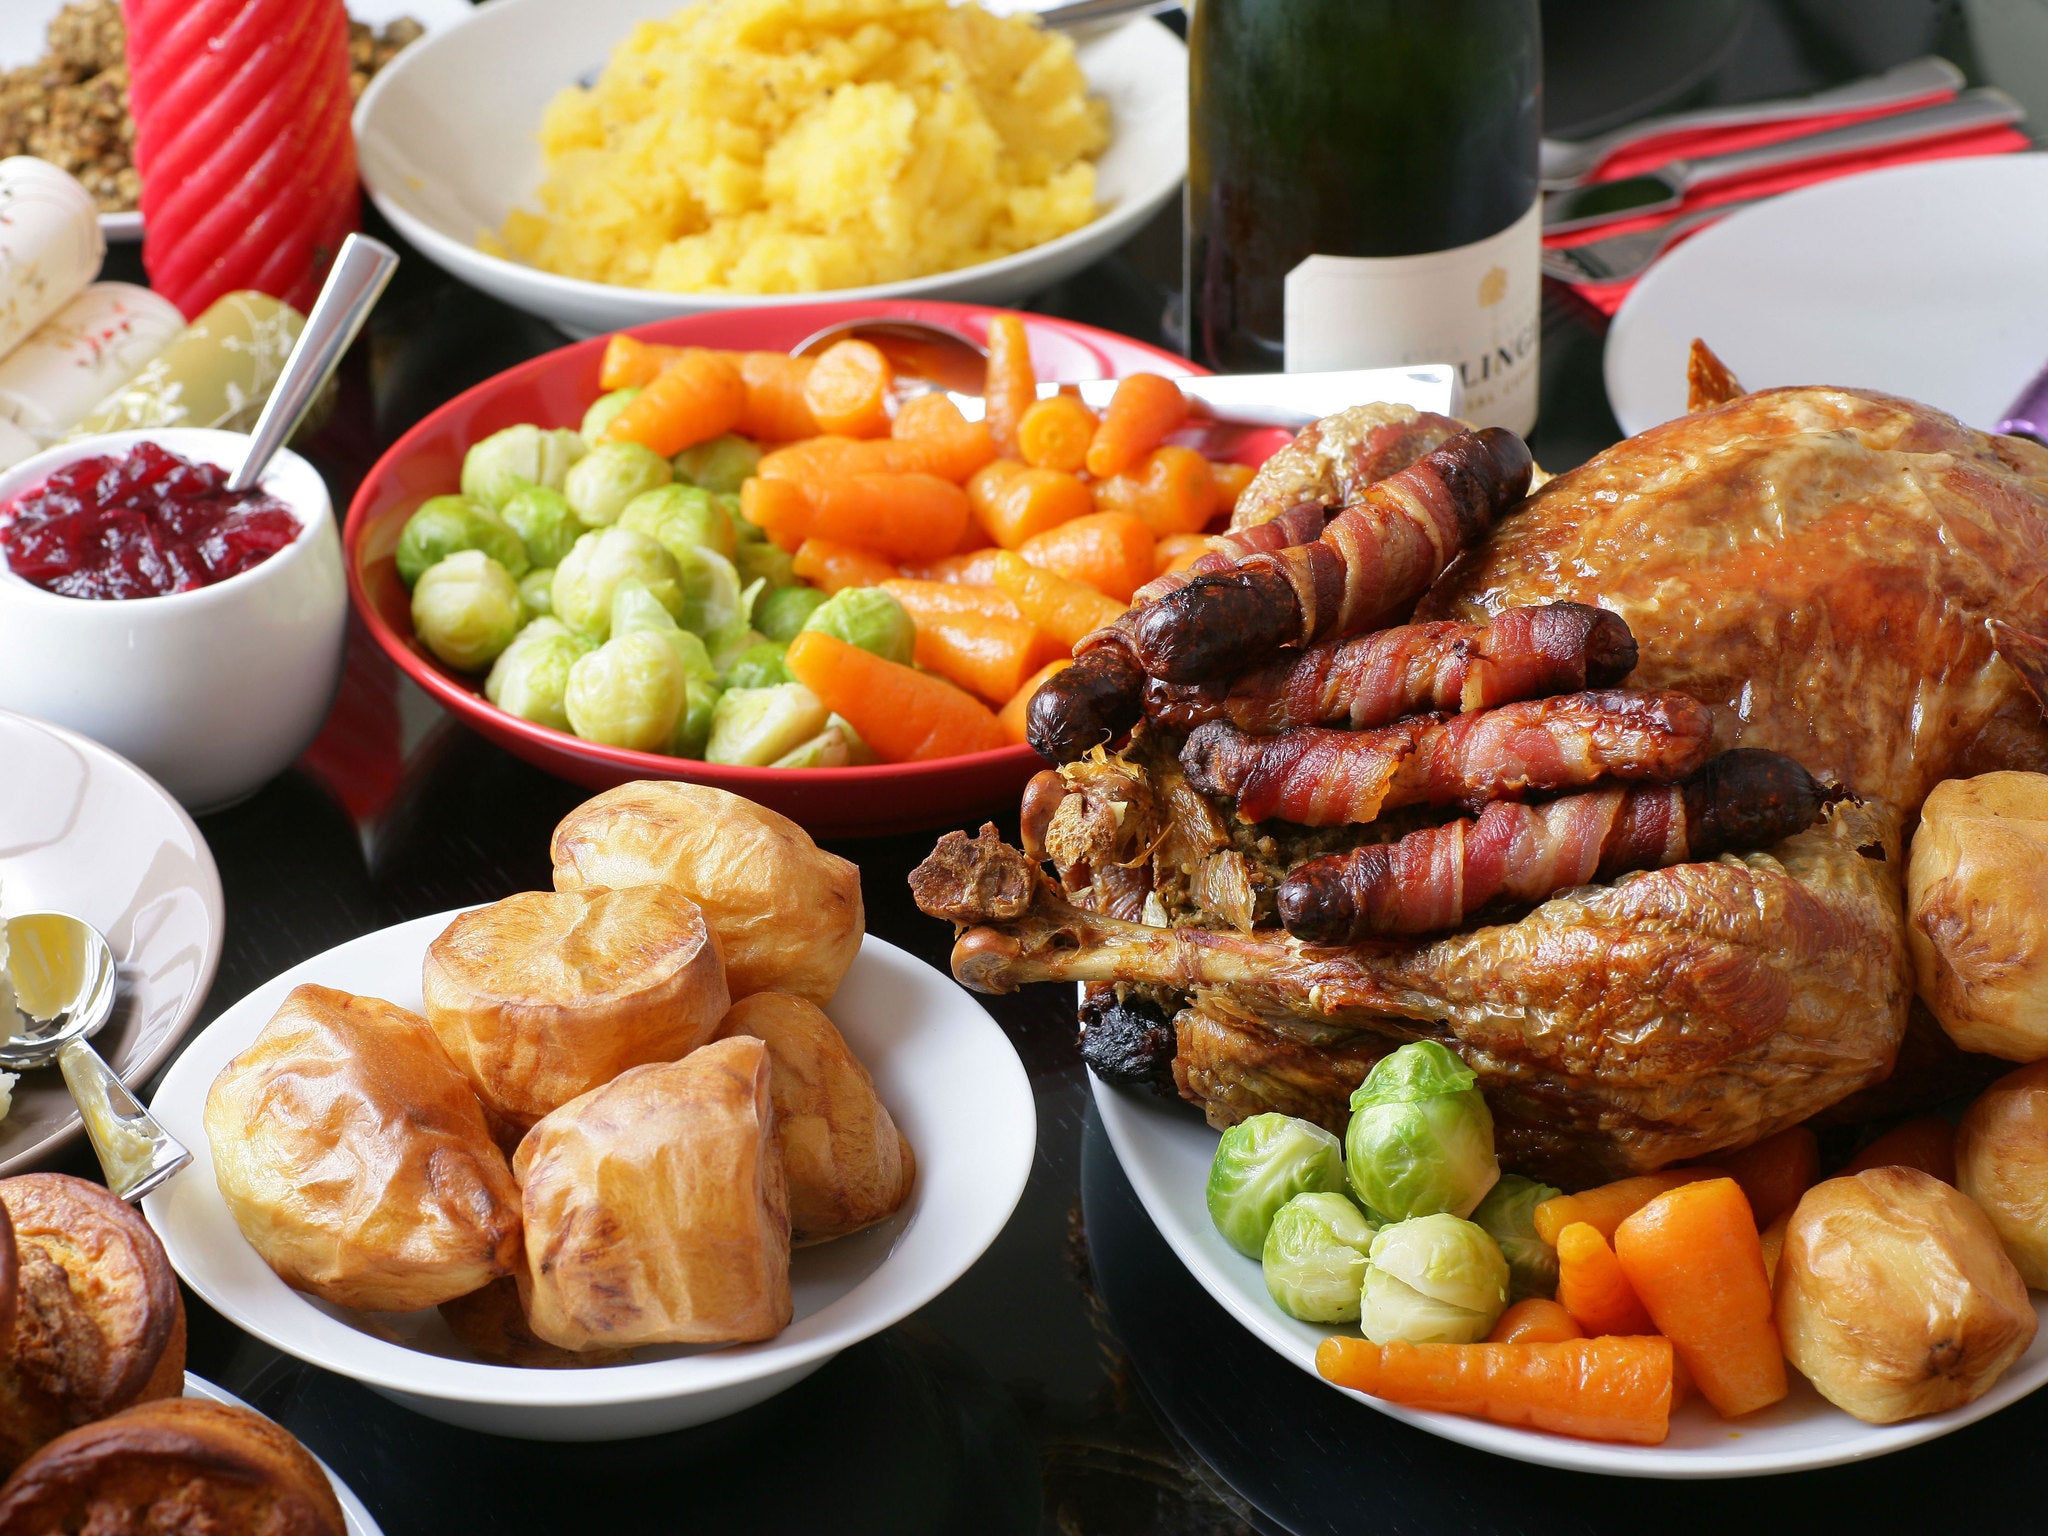 What Food Is Eaten On Christmas Day?